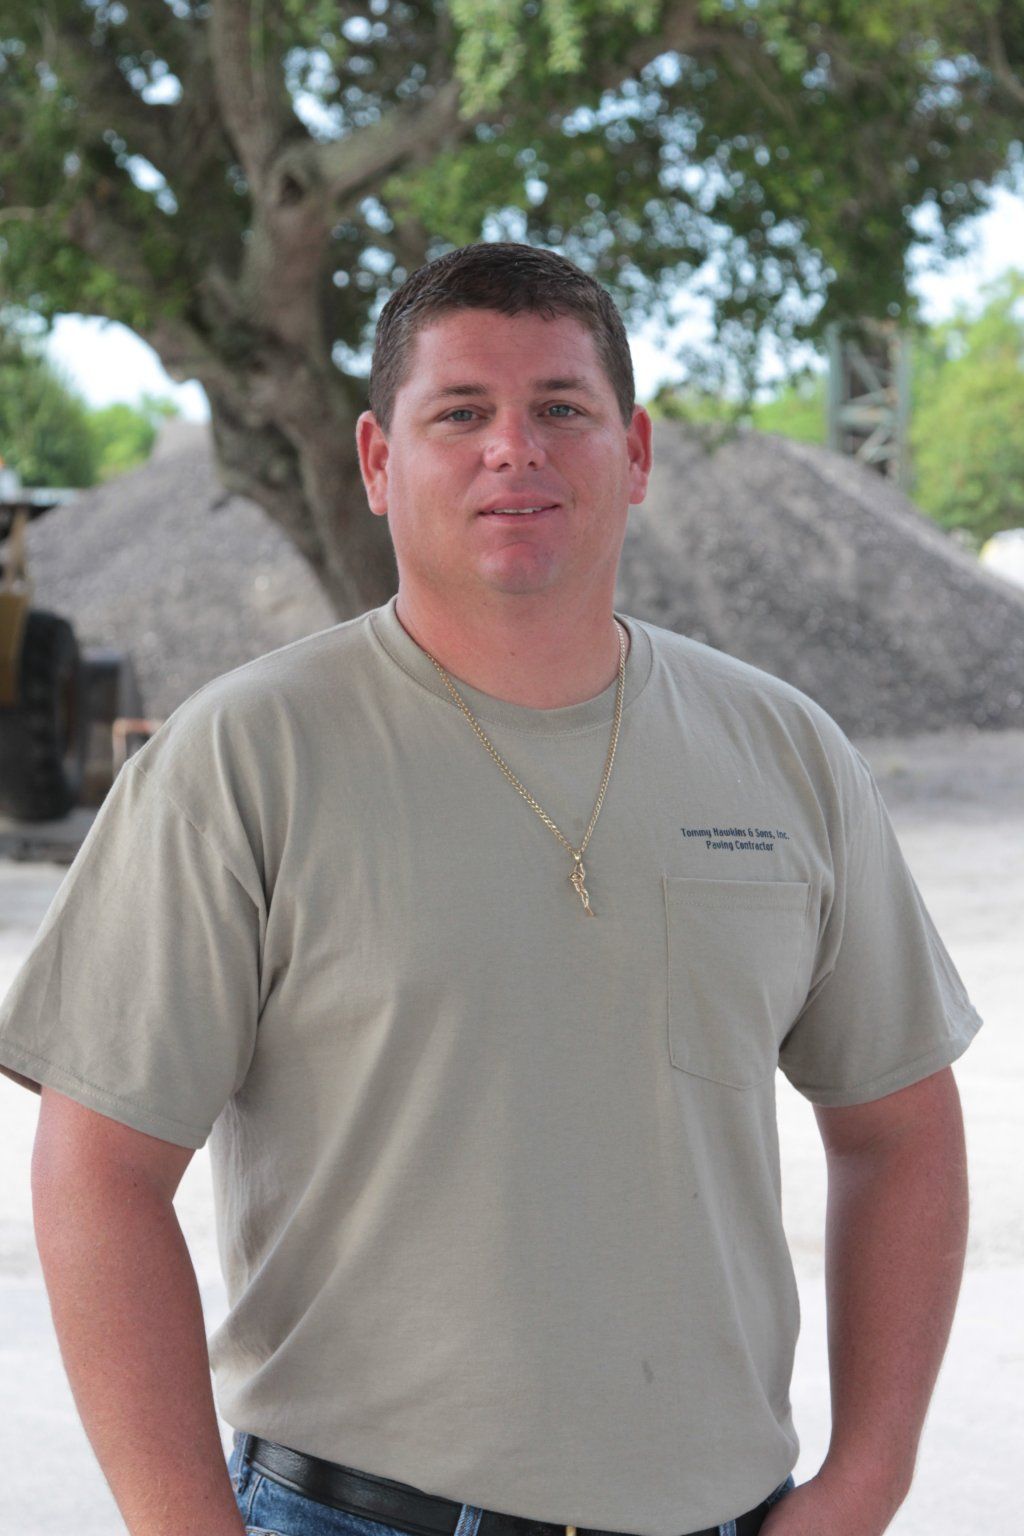 Bags of Concrete — One Of the Project Manager Of Hawkins Tommy & Sons in Fort Pierce, FL